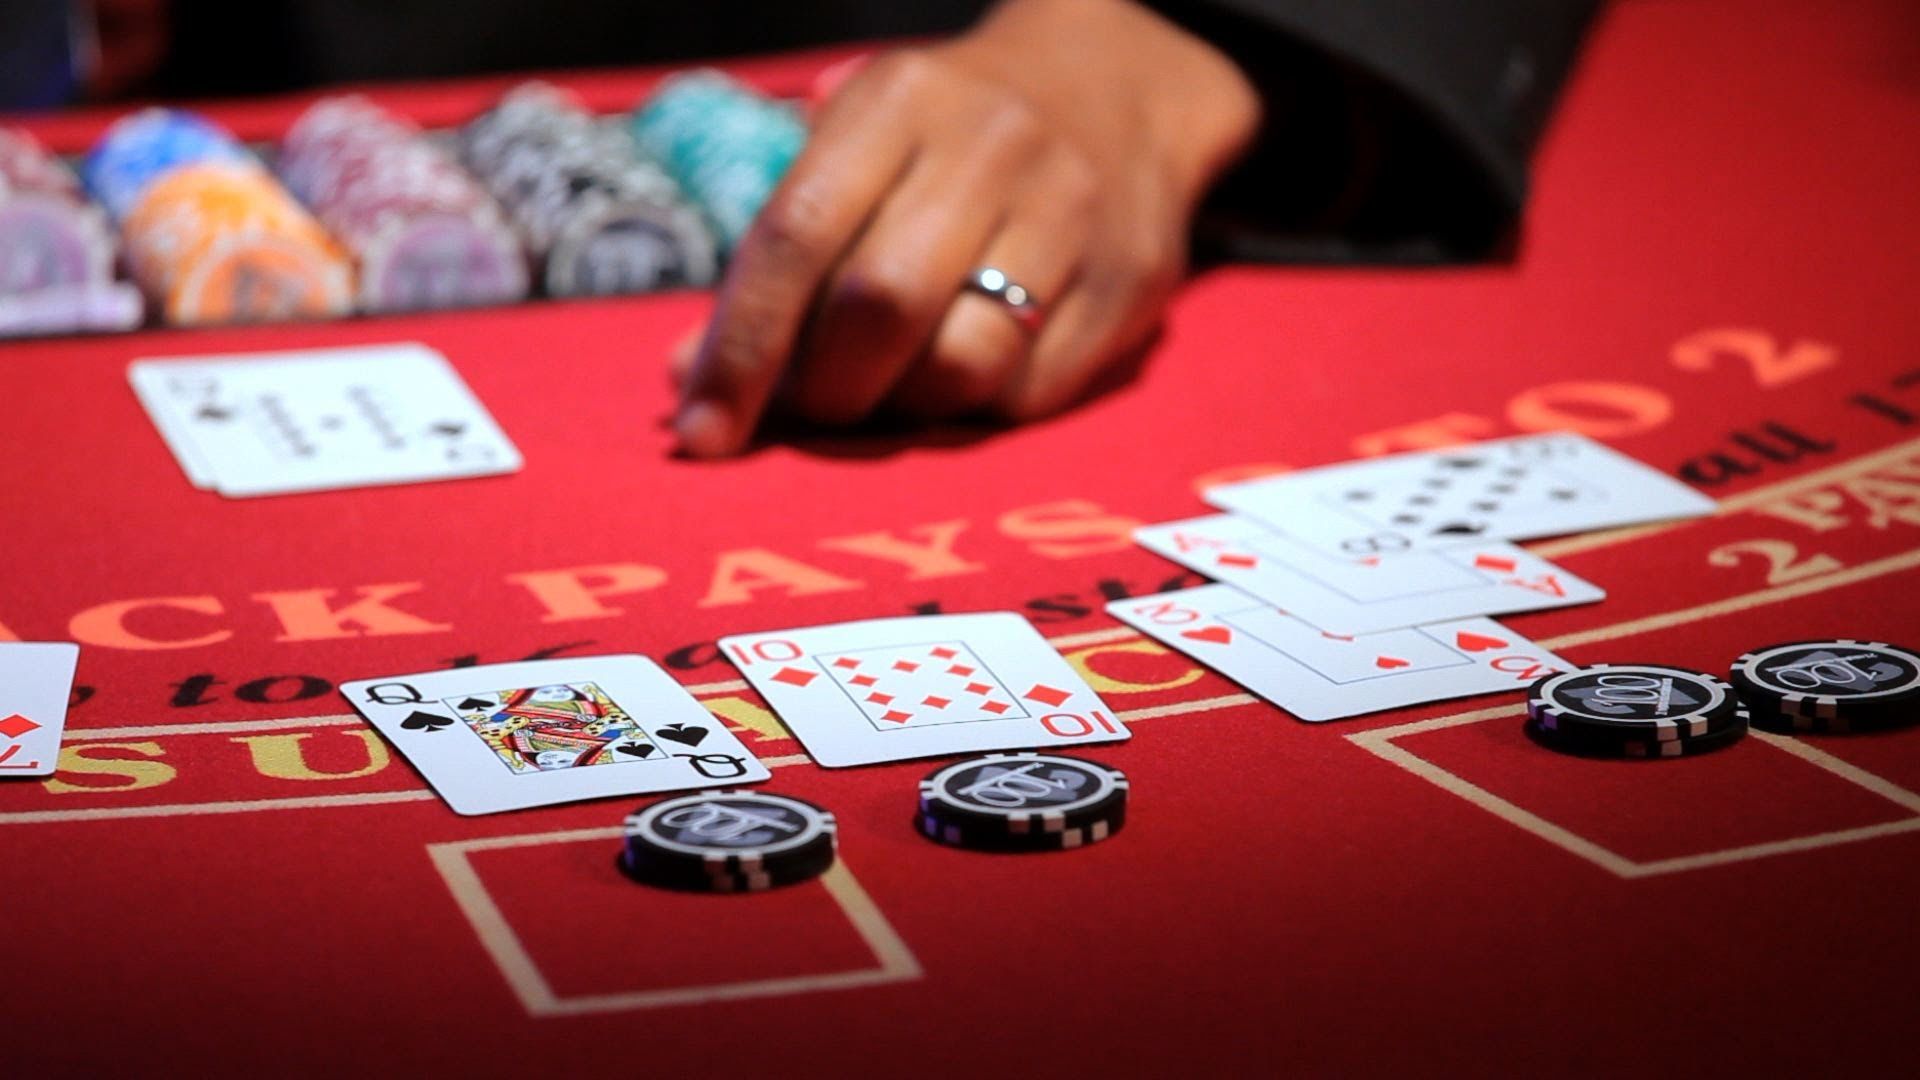 Follow these tips to get bonuses on online casinos